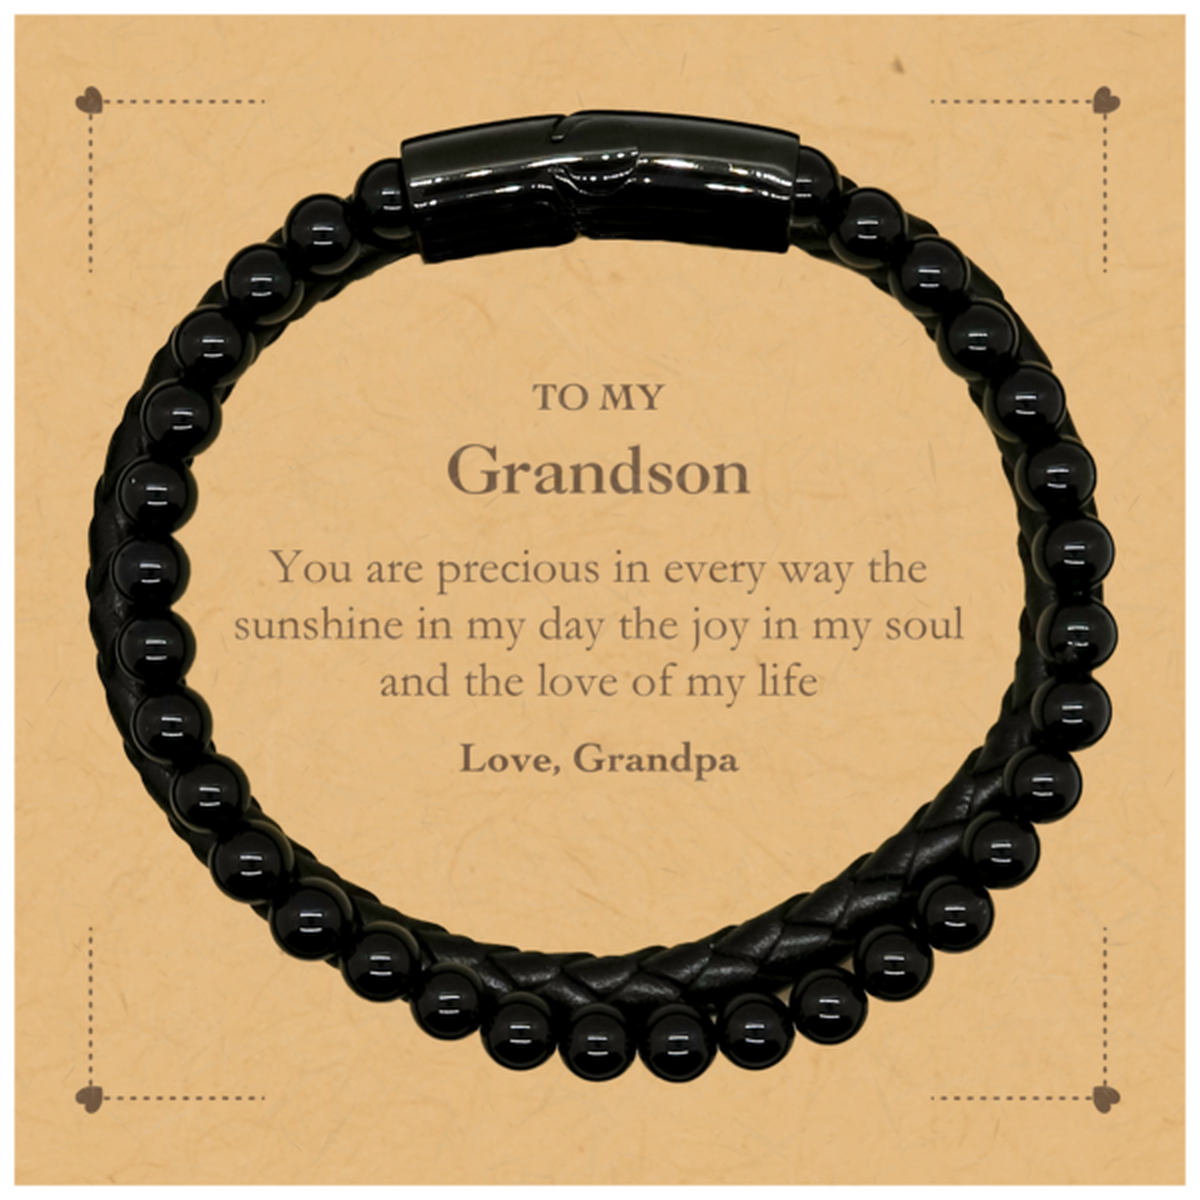 Graduation Gifts for Grandson Stone Leather Bracelets Present from Grandpa, Christmas Grandson Birthday Gifts Grandson You are precious in every way the sunshine in my day. Love, Grandpa